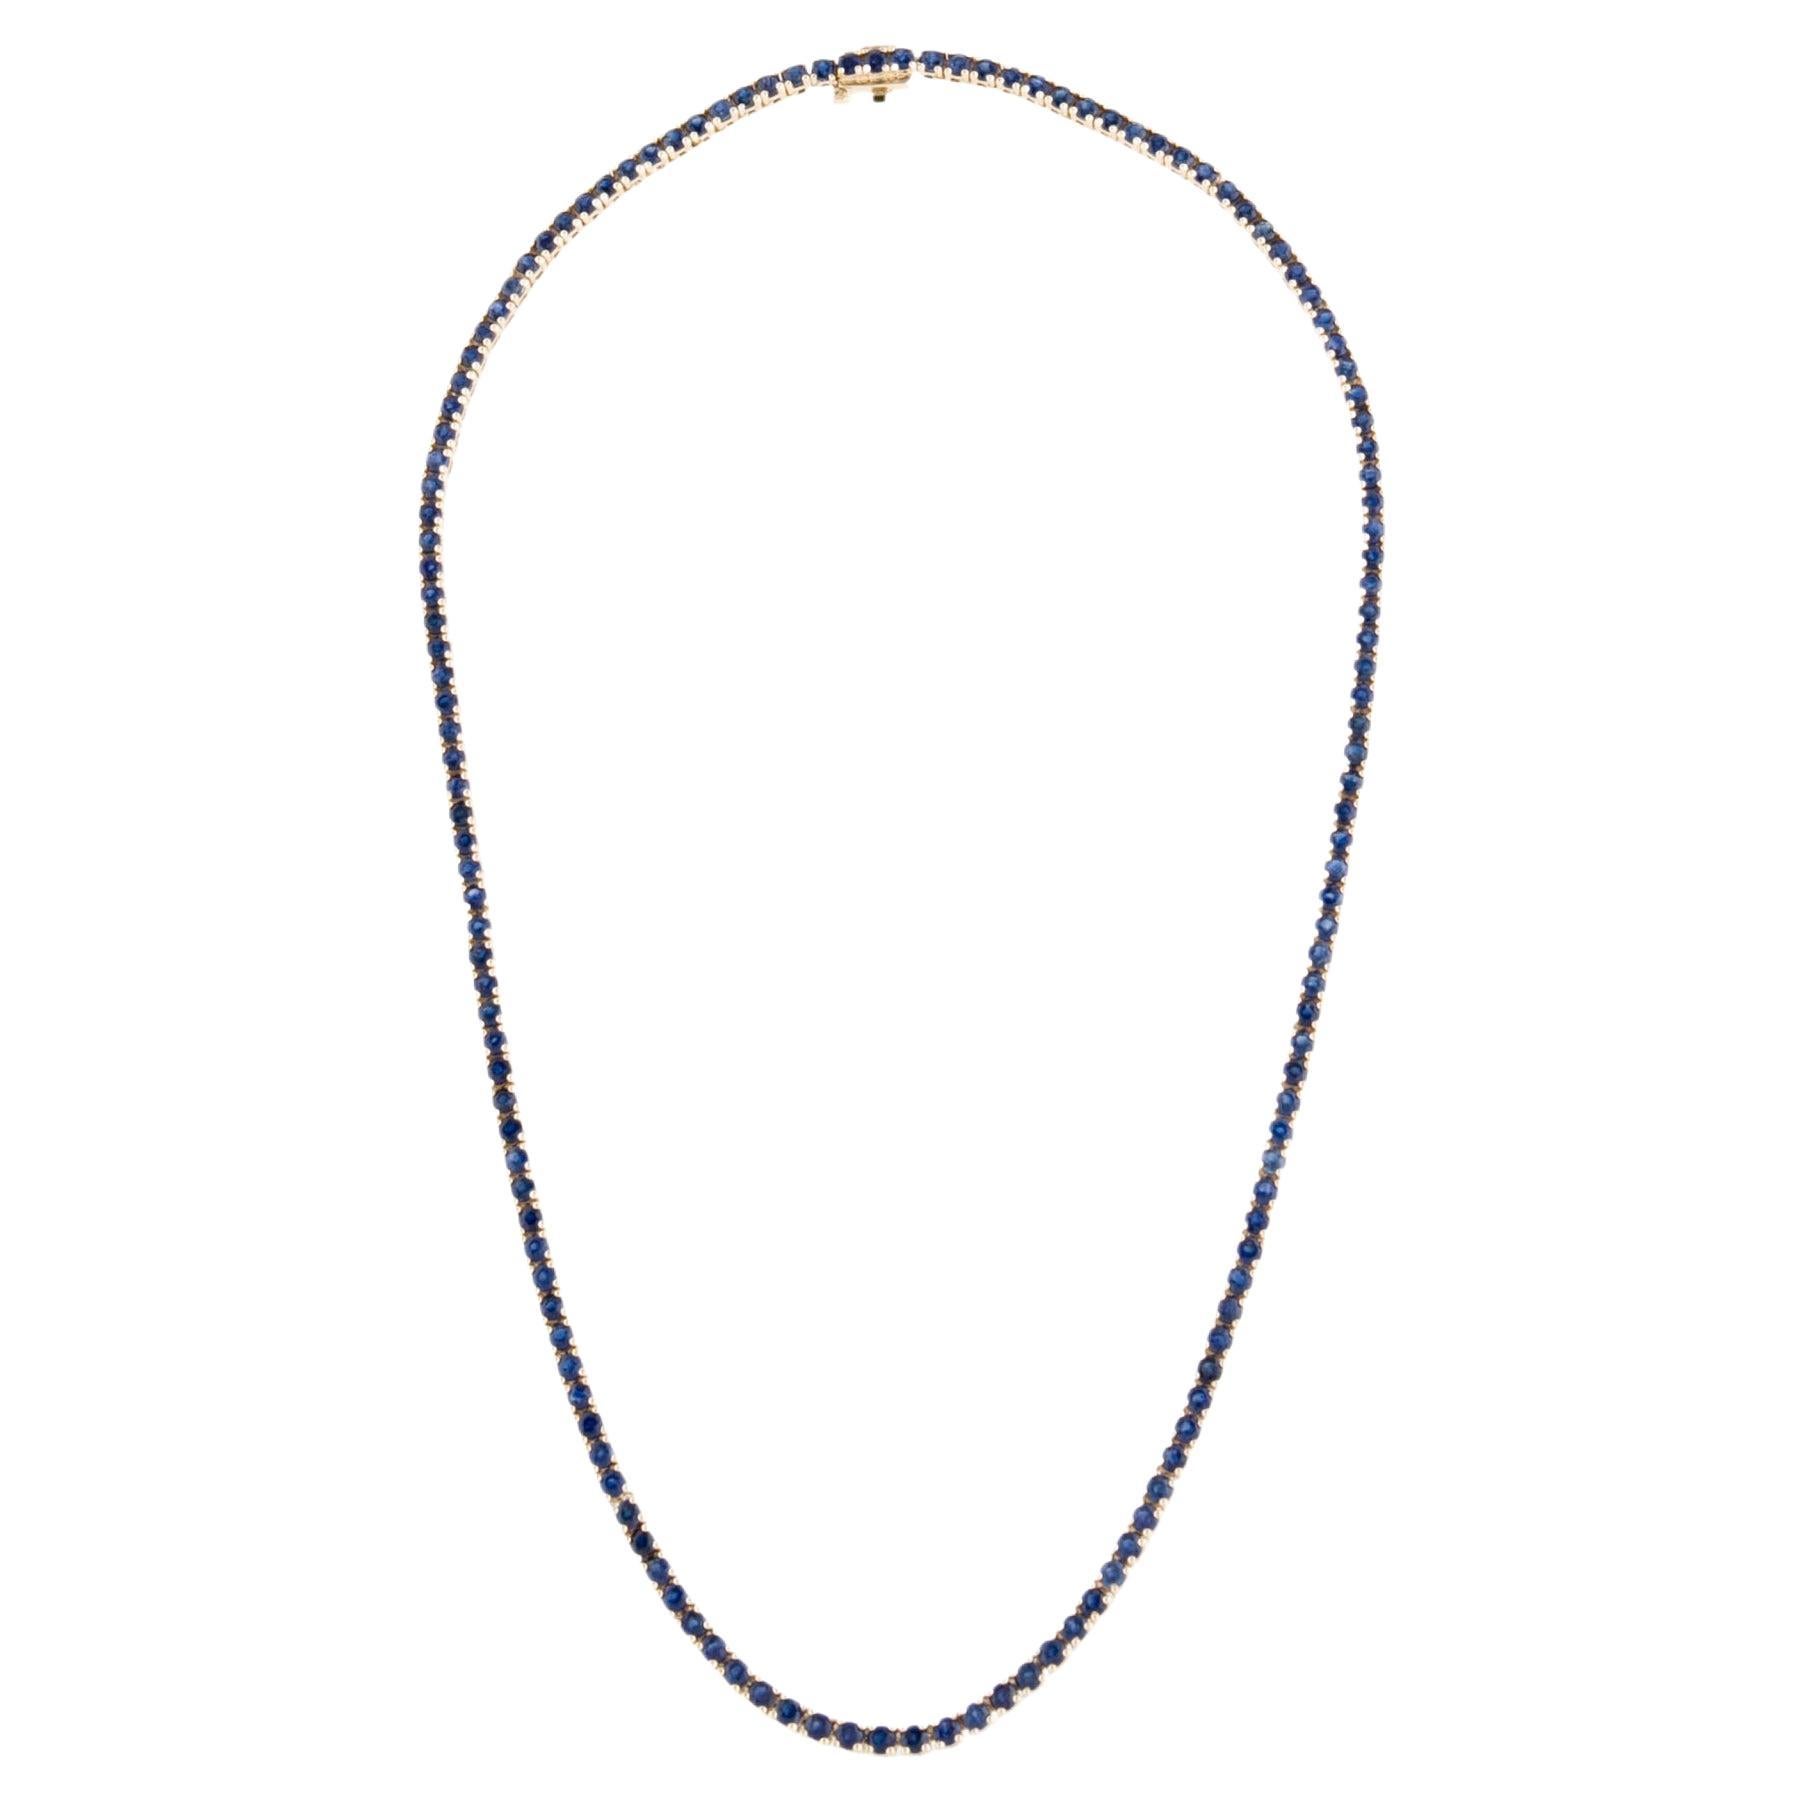 14K Sapphire Chain Necklace 15.26ctw - Exquisite & Timeless Jewelry Piece For Sale